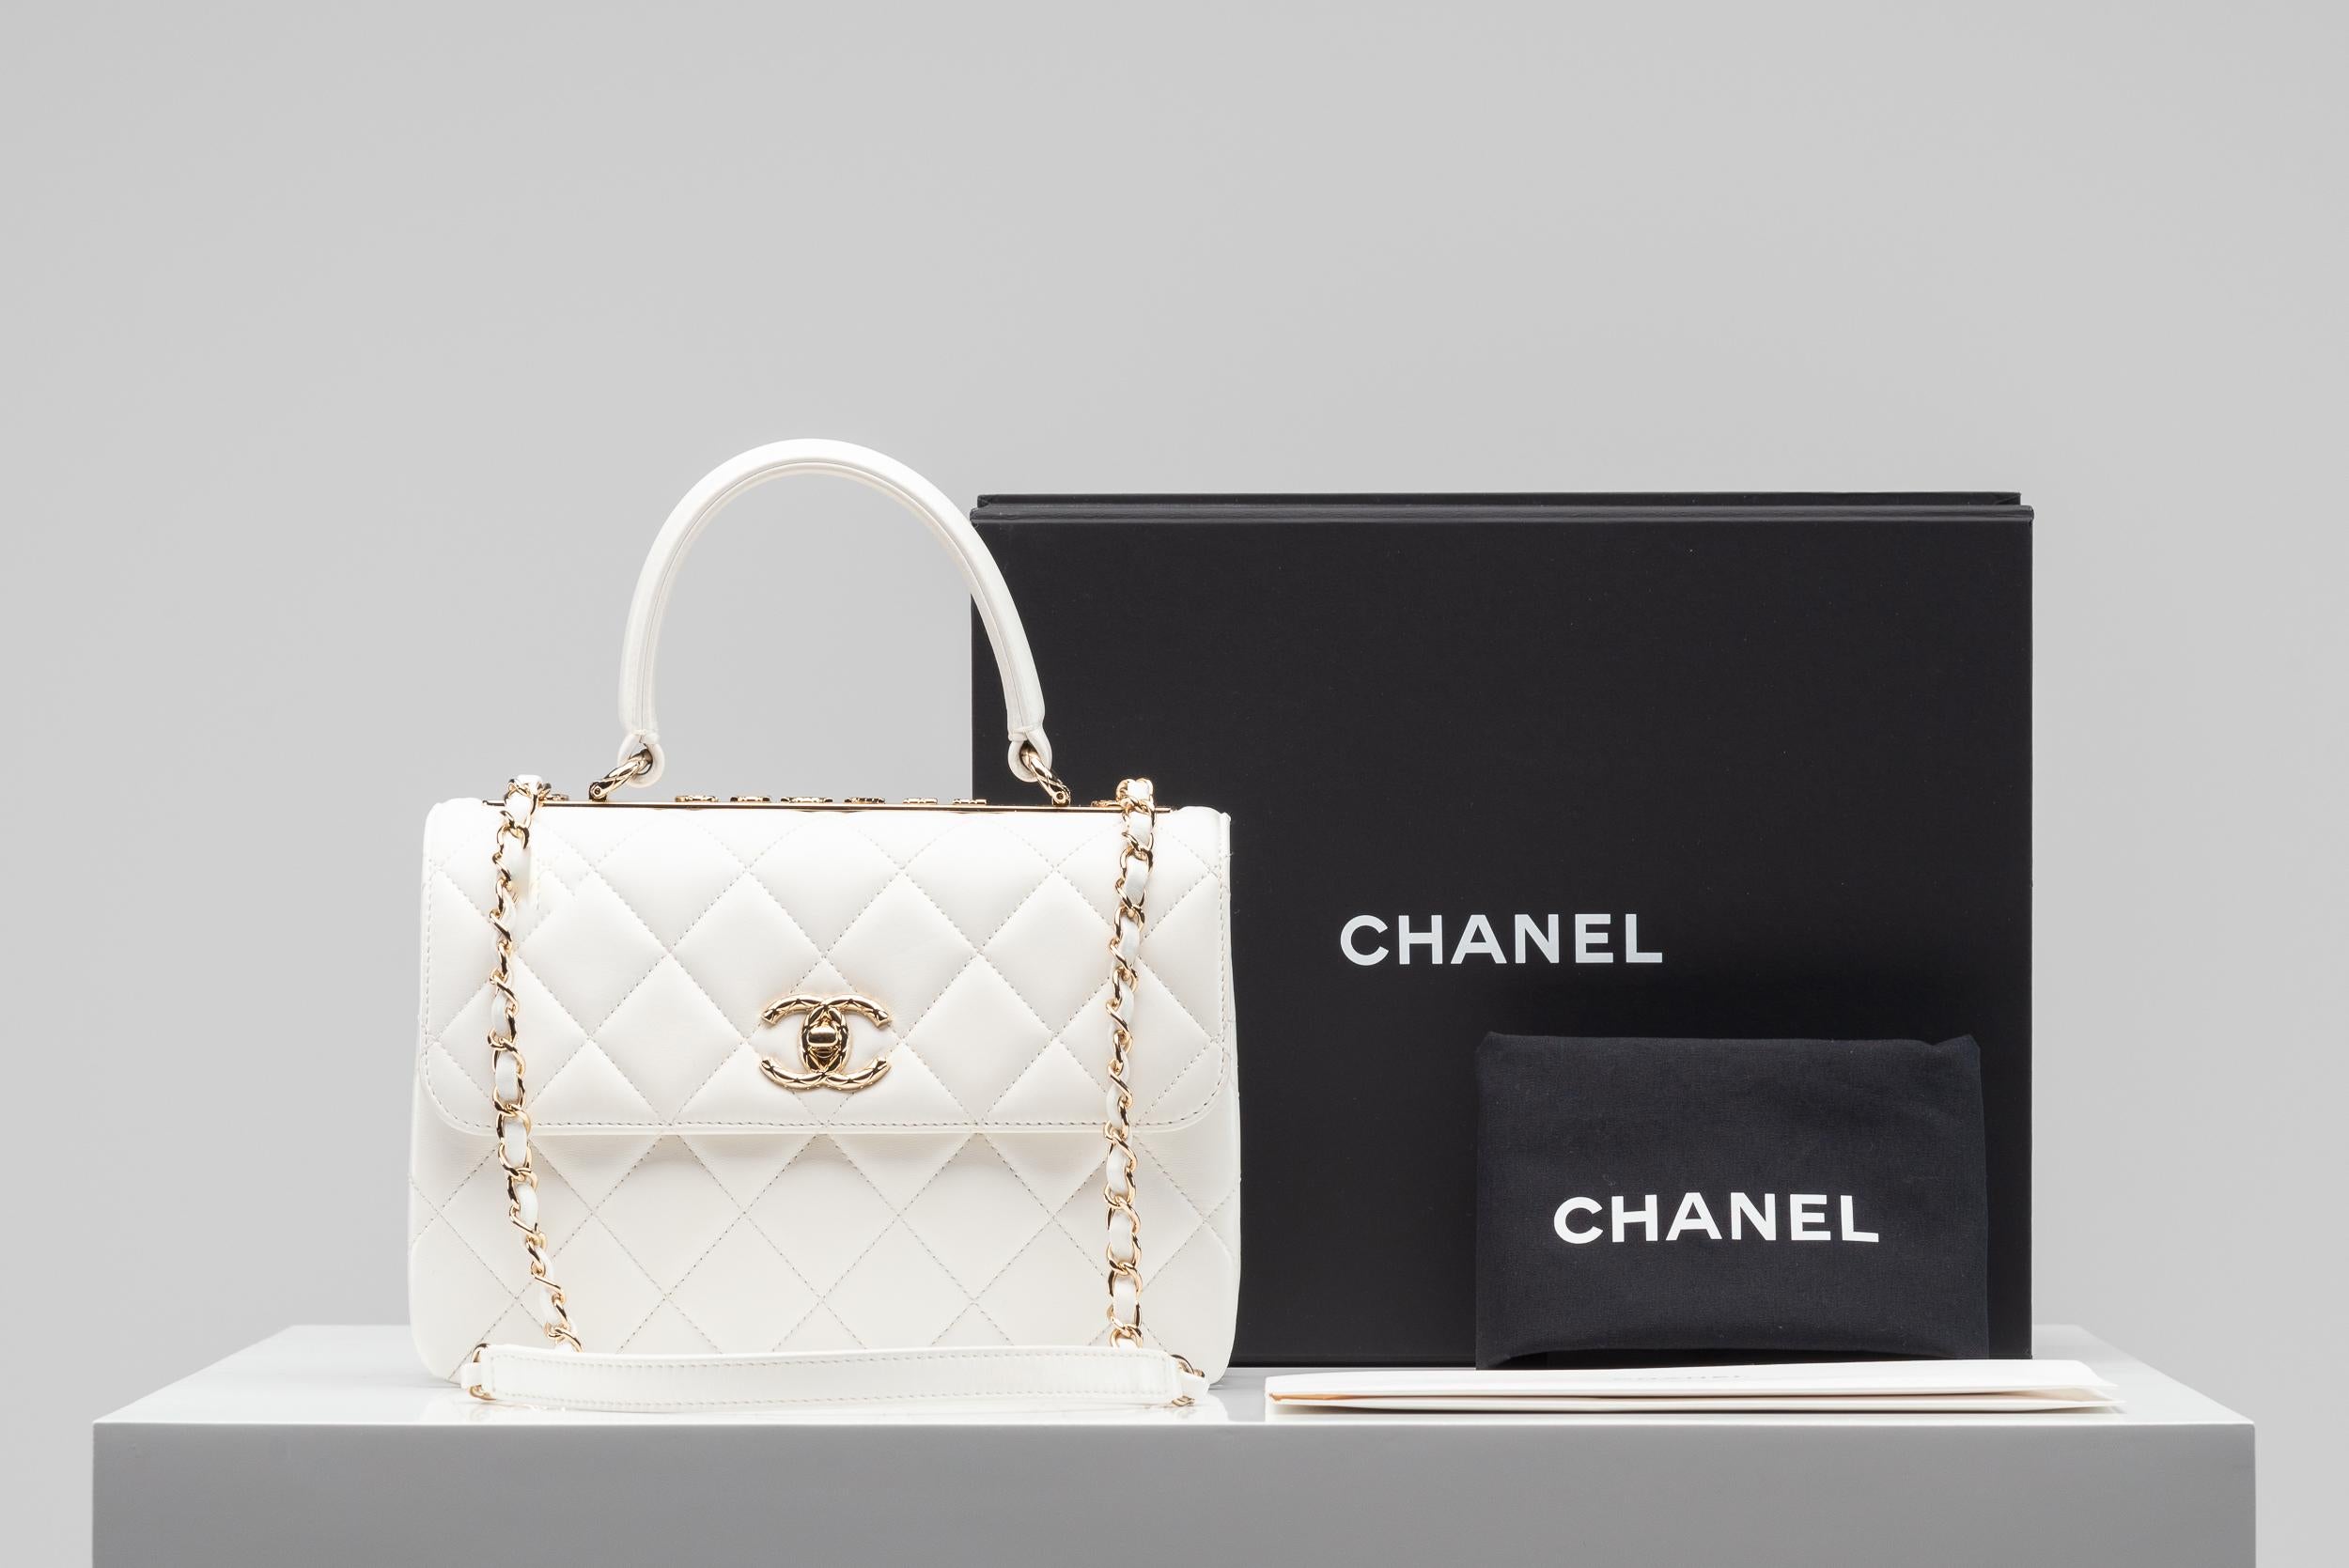 From the collection of SAVINETI we offer this Chanel CC Trendy Bag:
- Brand: Chanel
- Model: CC Trendy Bag
- Color: White
- Year: 2022
- Condition: Excellent (has almost never been used)
- Materials: lambskin leather, Gold-Tone hardware
- Extras: